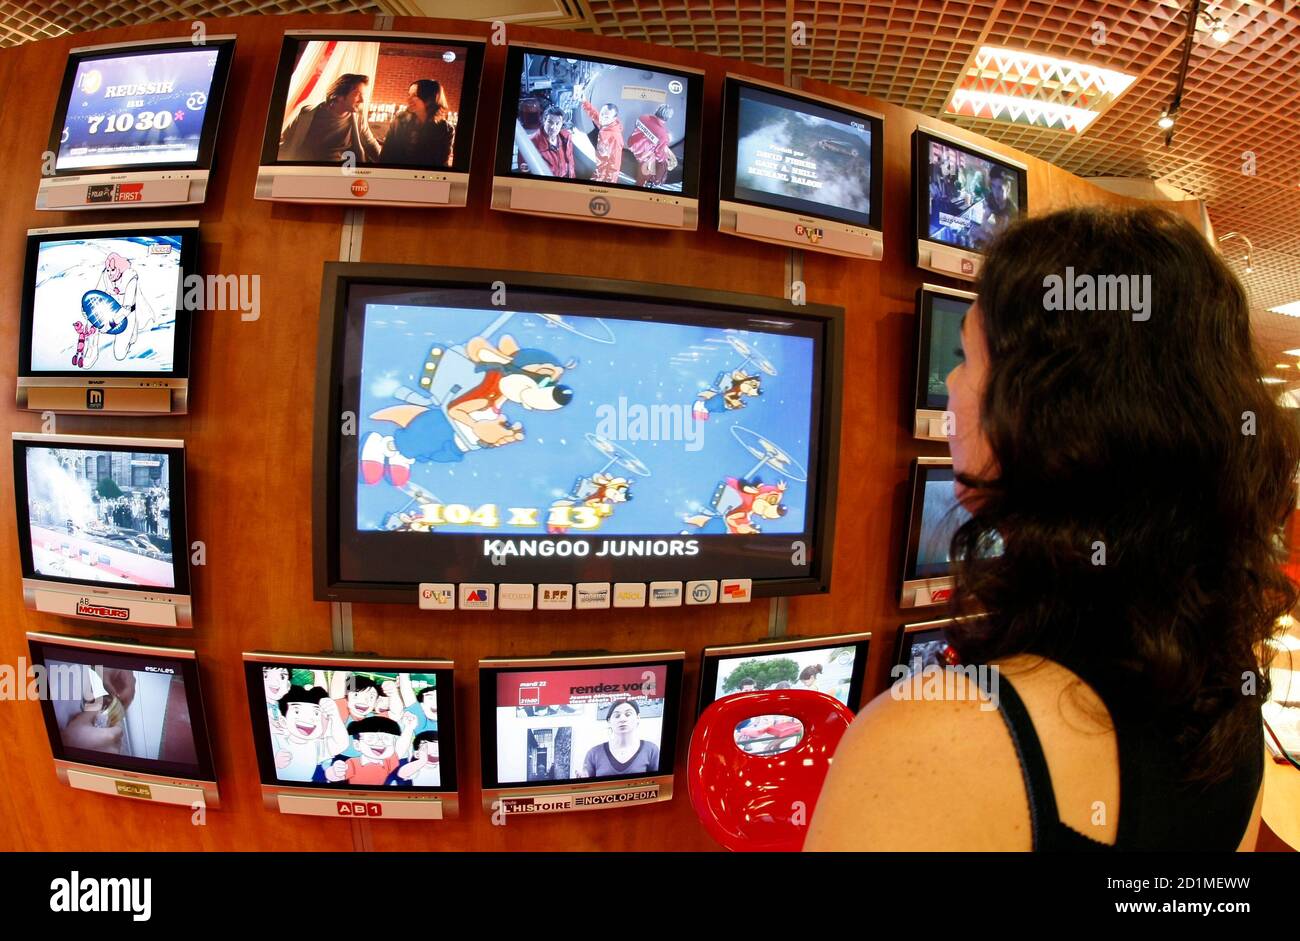 A visitor looks at television programmes during the annual MIPCOM television  programme market in Cannes, southeastern France, October 5, 2009. The  international film and programme market for TV, video, cable and satellite (